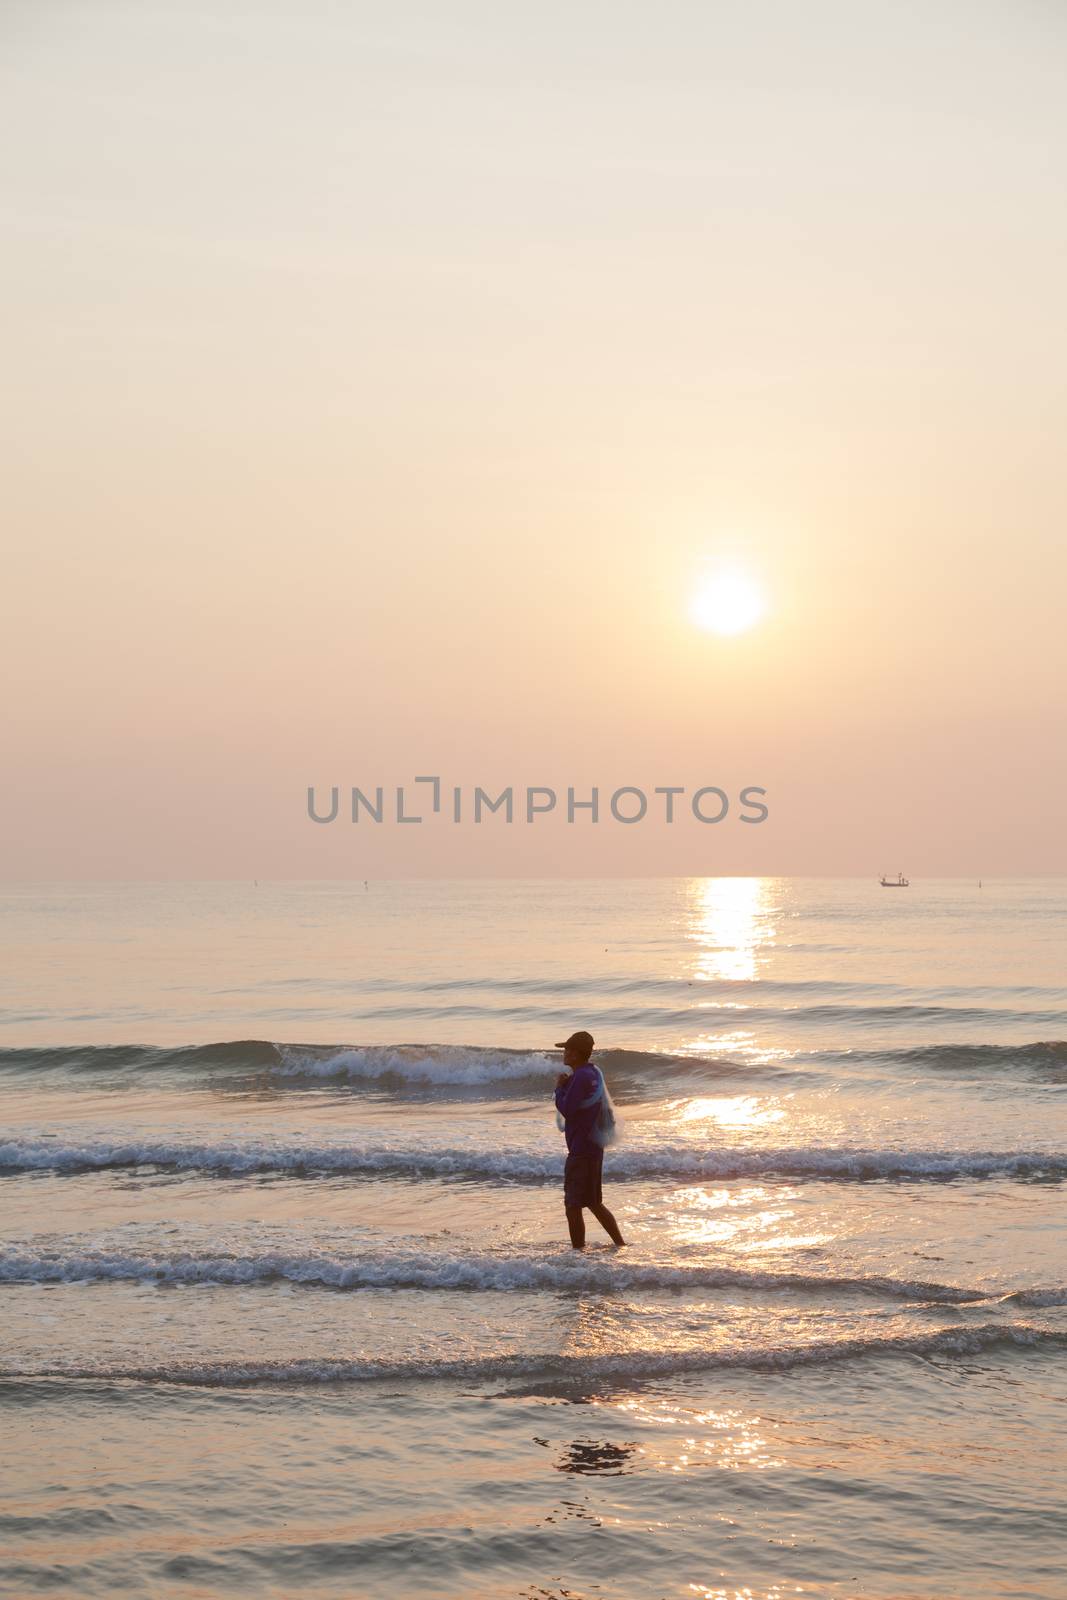 Man walking on the beach by a454